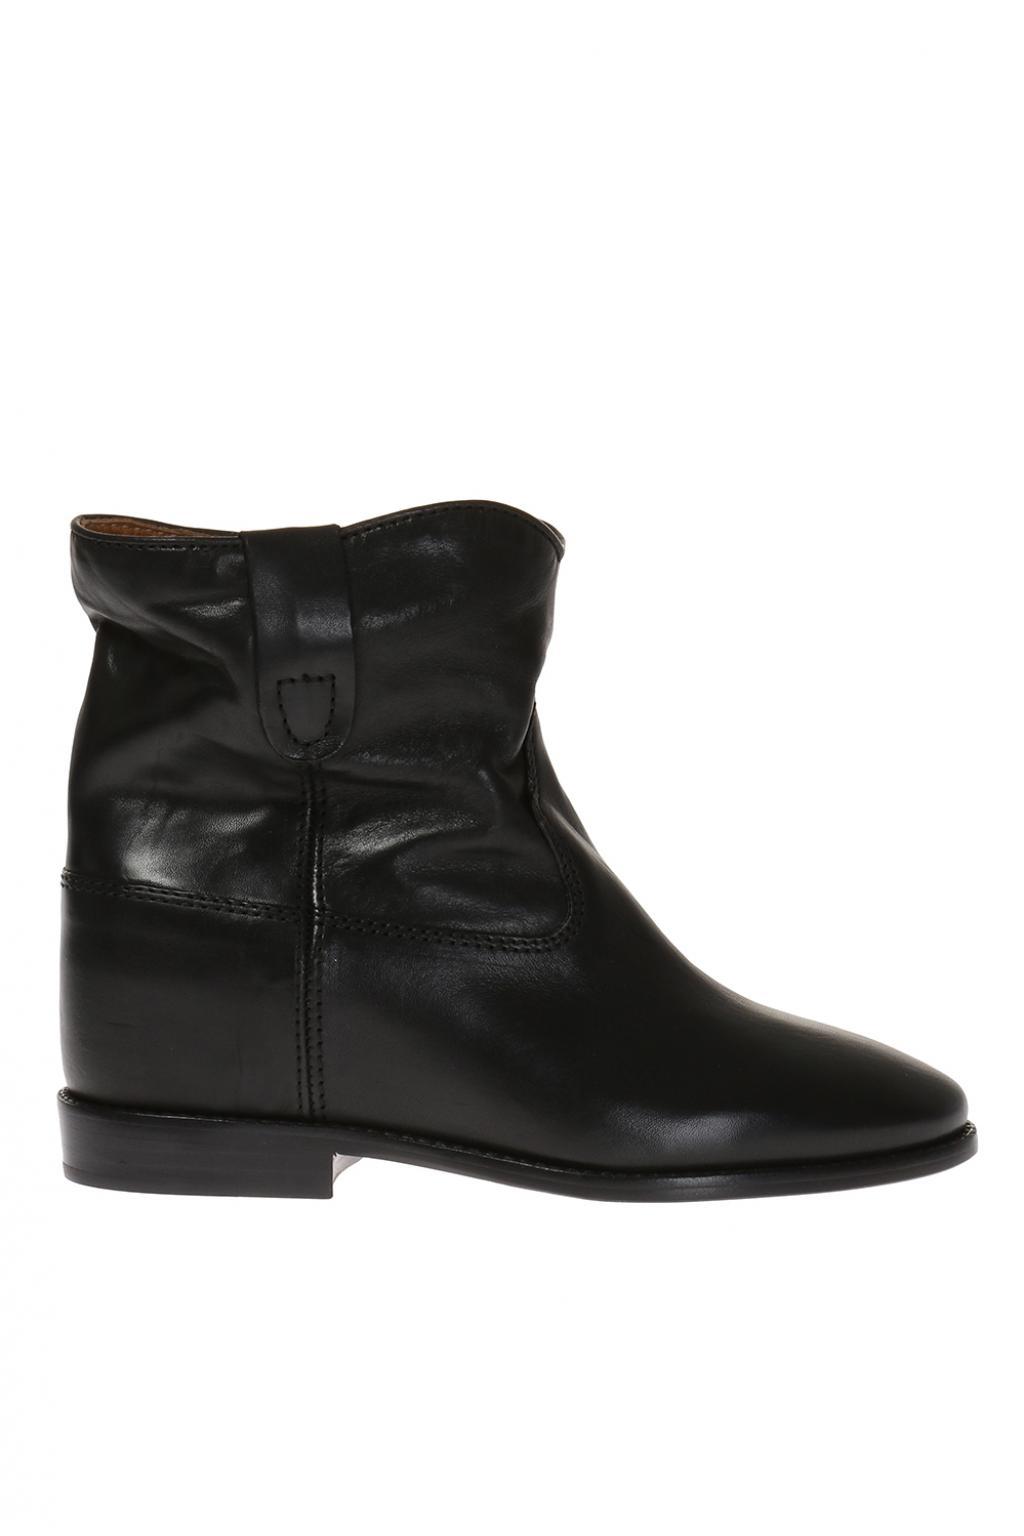 Isabel Marant 'crisi' Leather Ankle Boots in Black - Lyst